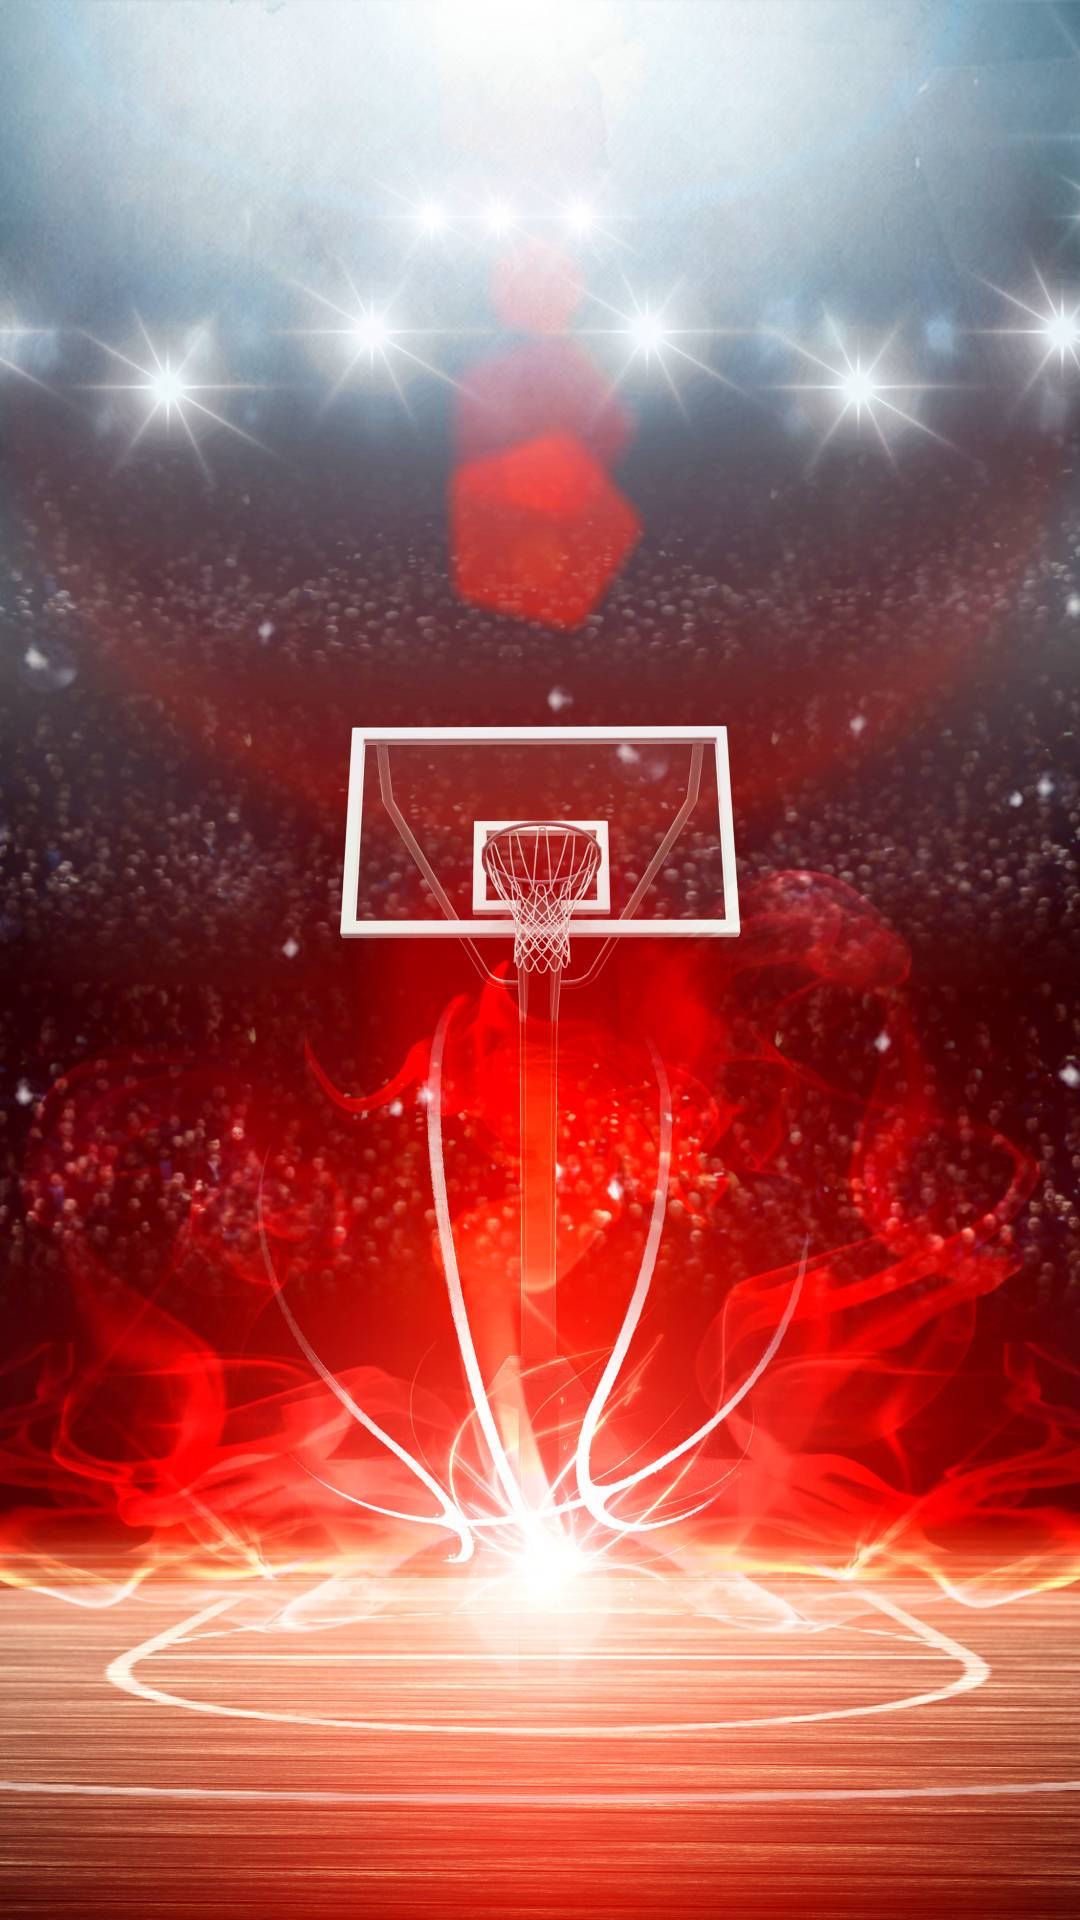 Basketball Court iPhone Wallpaper with high-resolution 1080x1920 pixel. You can use this wallpaper for your iPhone 5, 6, 7, 8, X, XS, XR backgrounds, Mobile Screensaver, or iPad Lock Screen - Basketball